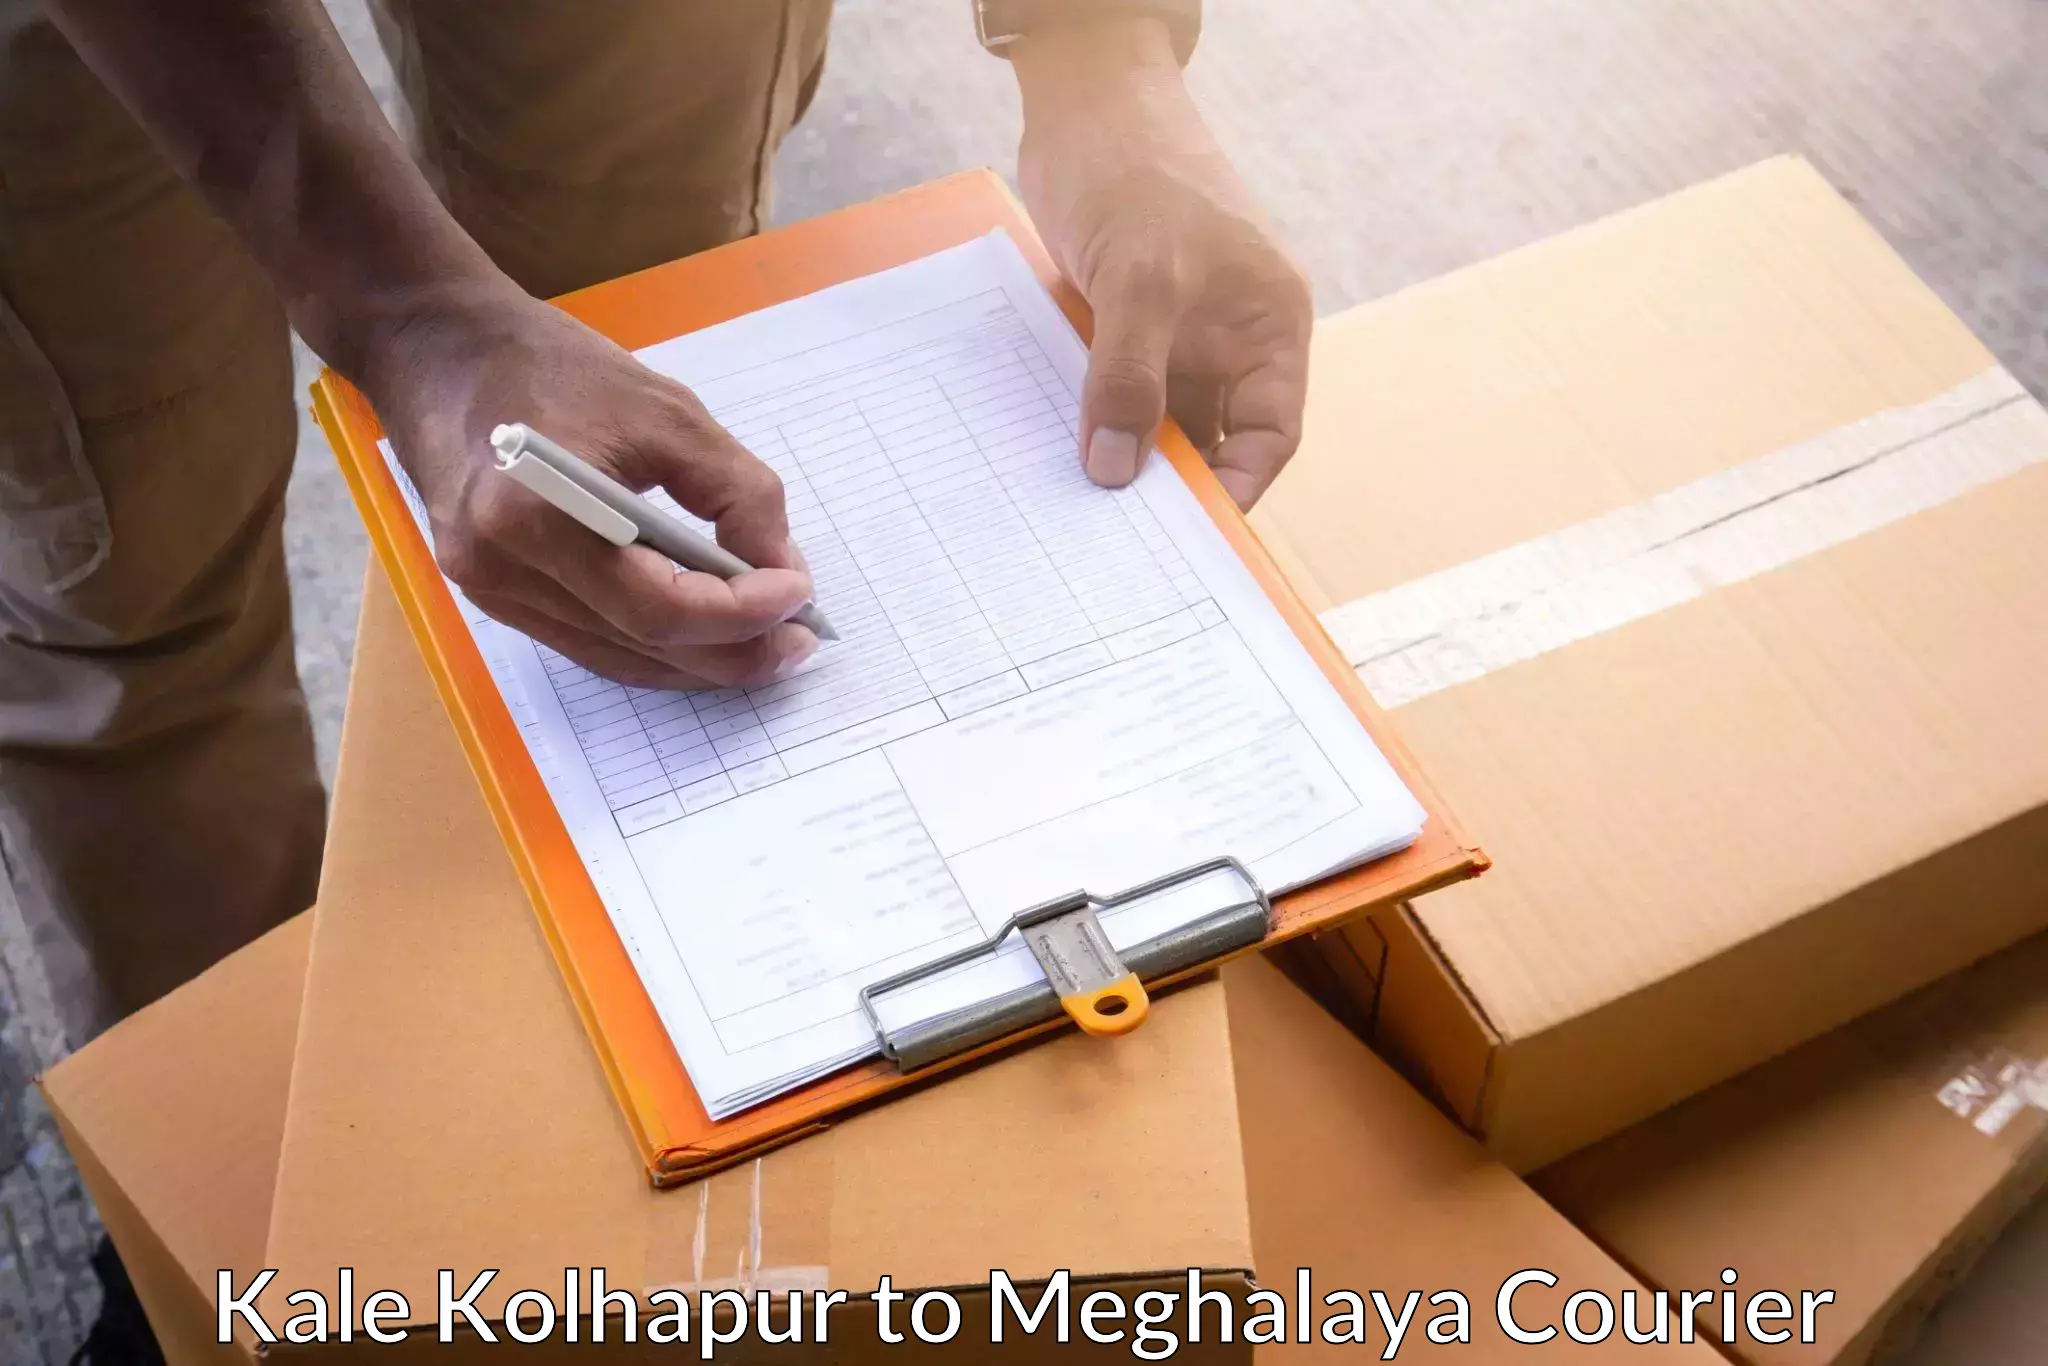 Cost-effective courier options Kale Kolhapur to Shillong